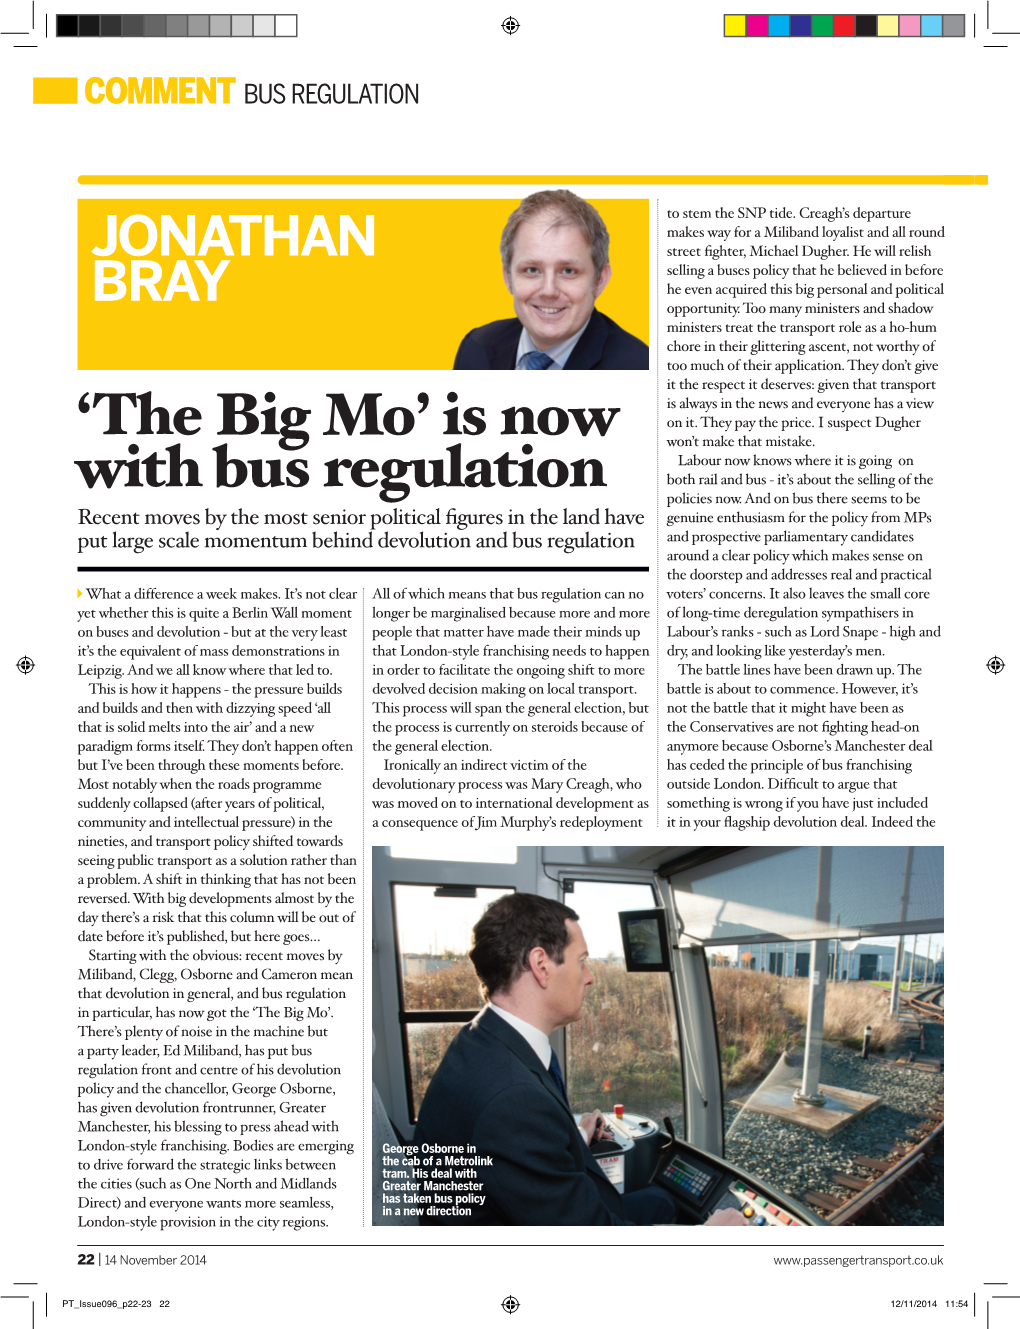 'The Big Mo' Is Now with Bus Regulation